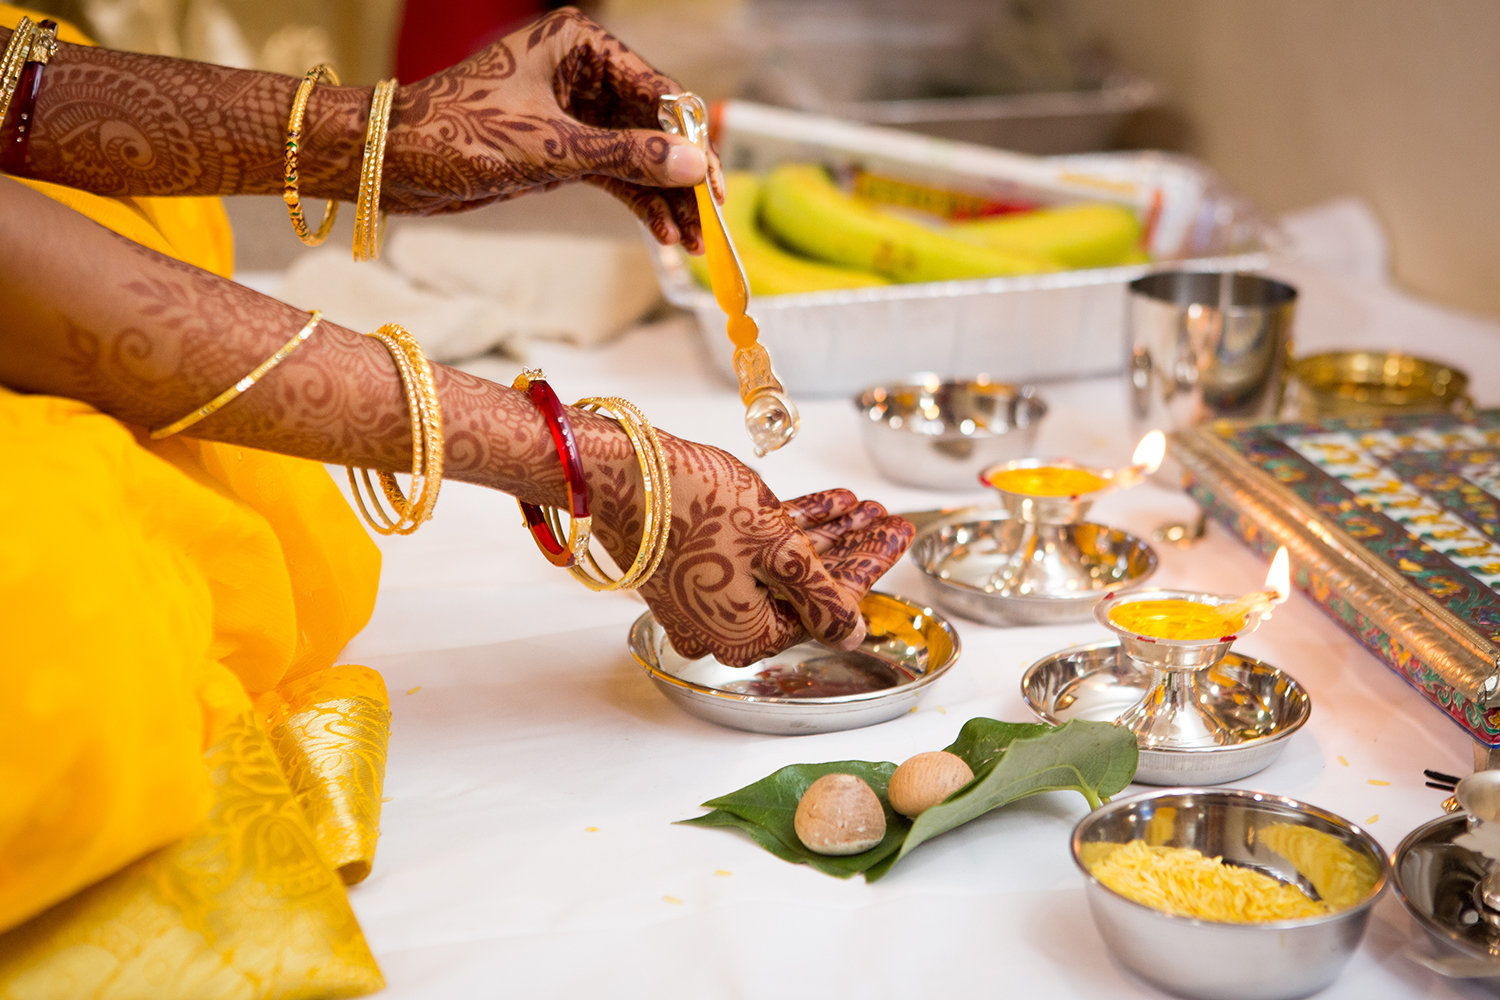 Close up of a Hindu Indian bride's hands during a wedding ceremony